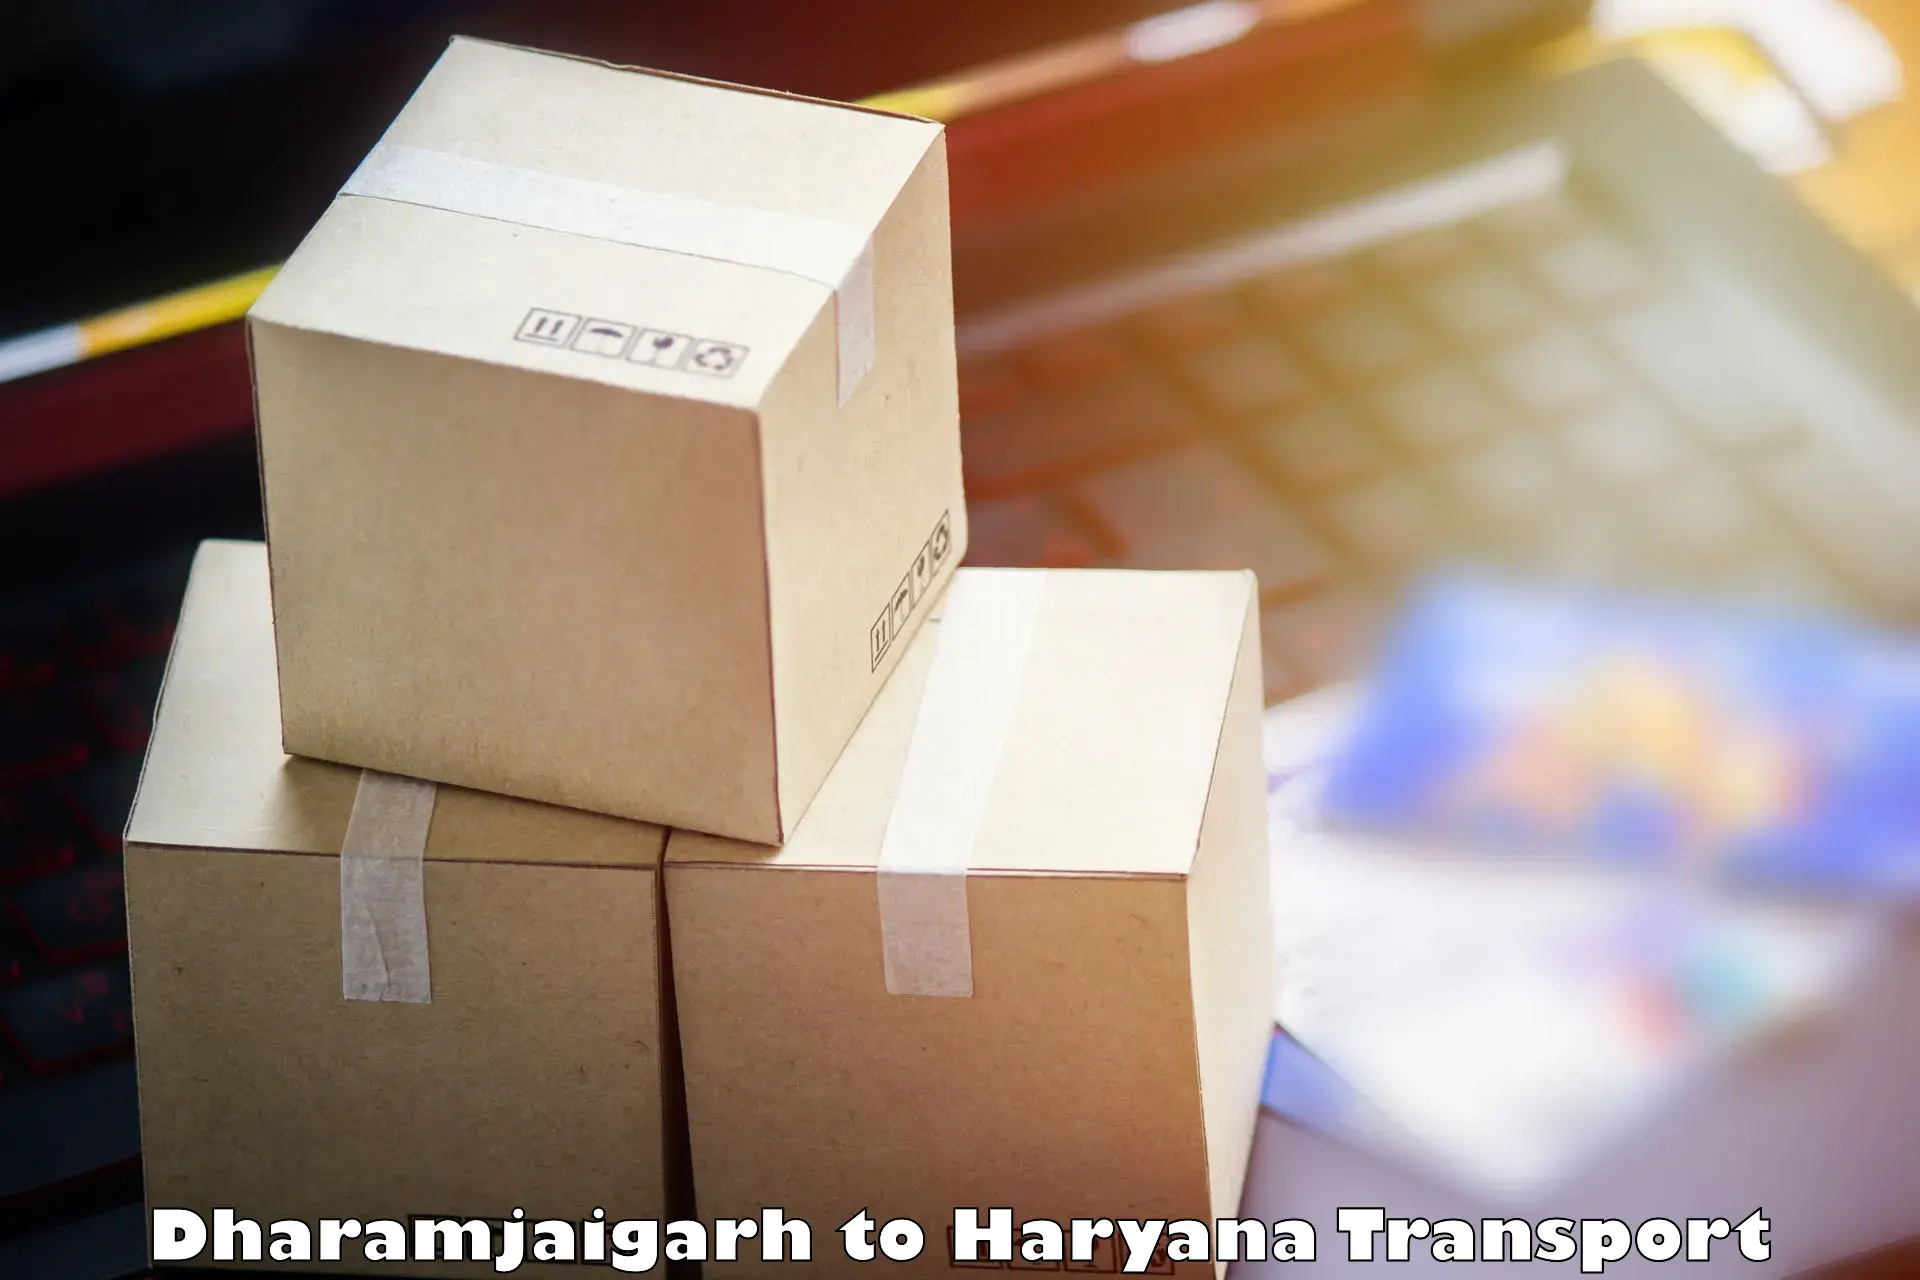 Road transport online services Dharamjaigarh to Faridabad